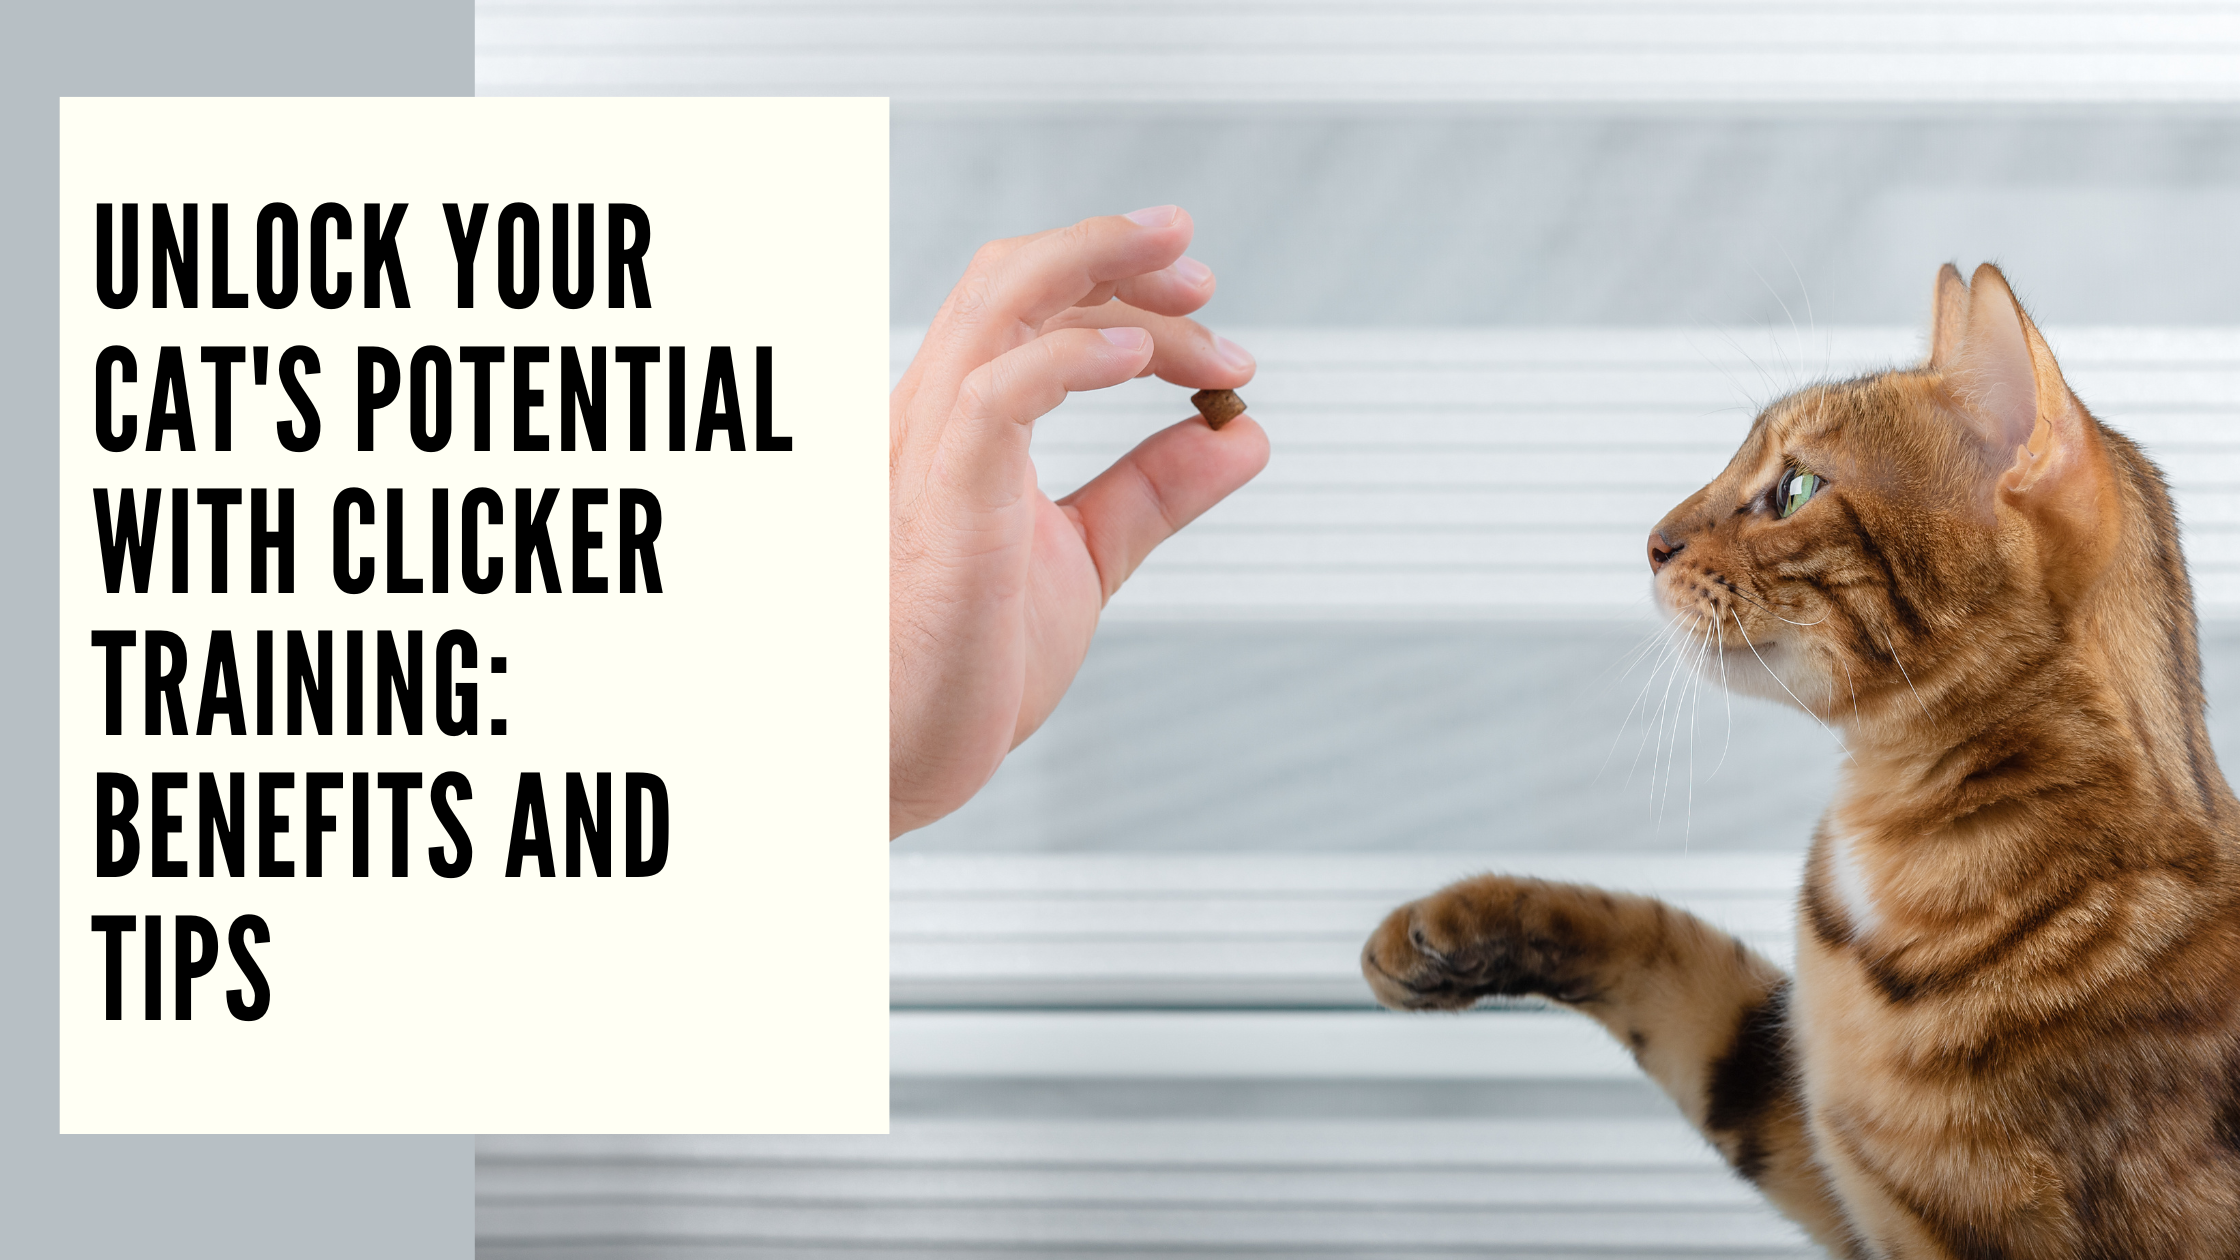 Unlock Your Cat's Potential with Clicker Training Benefits and Tips